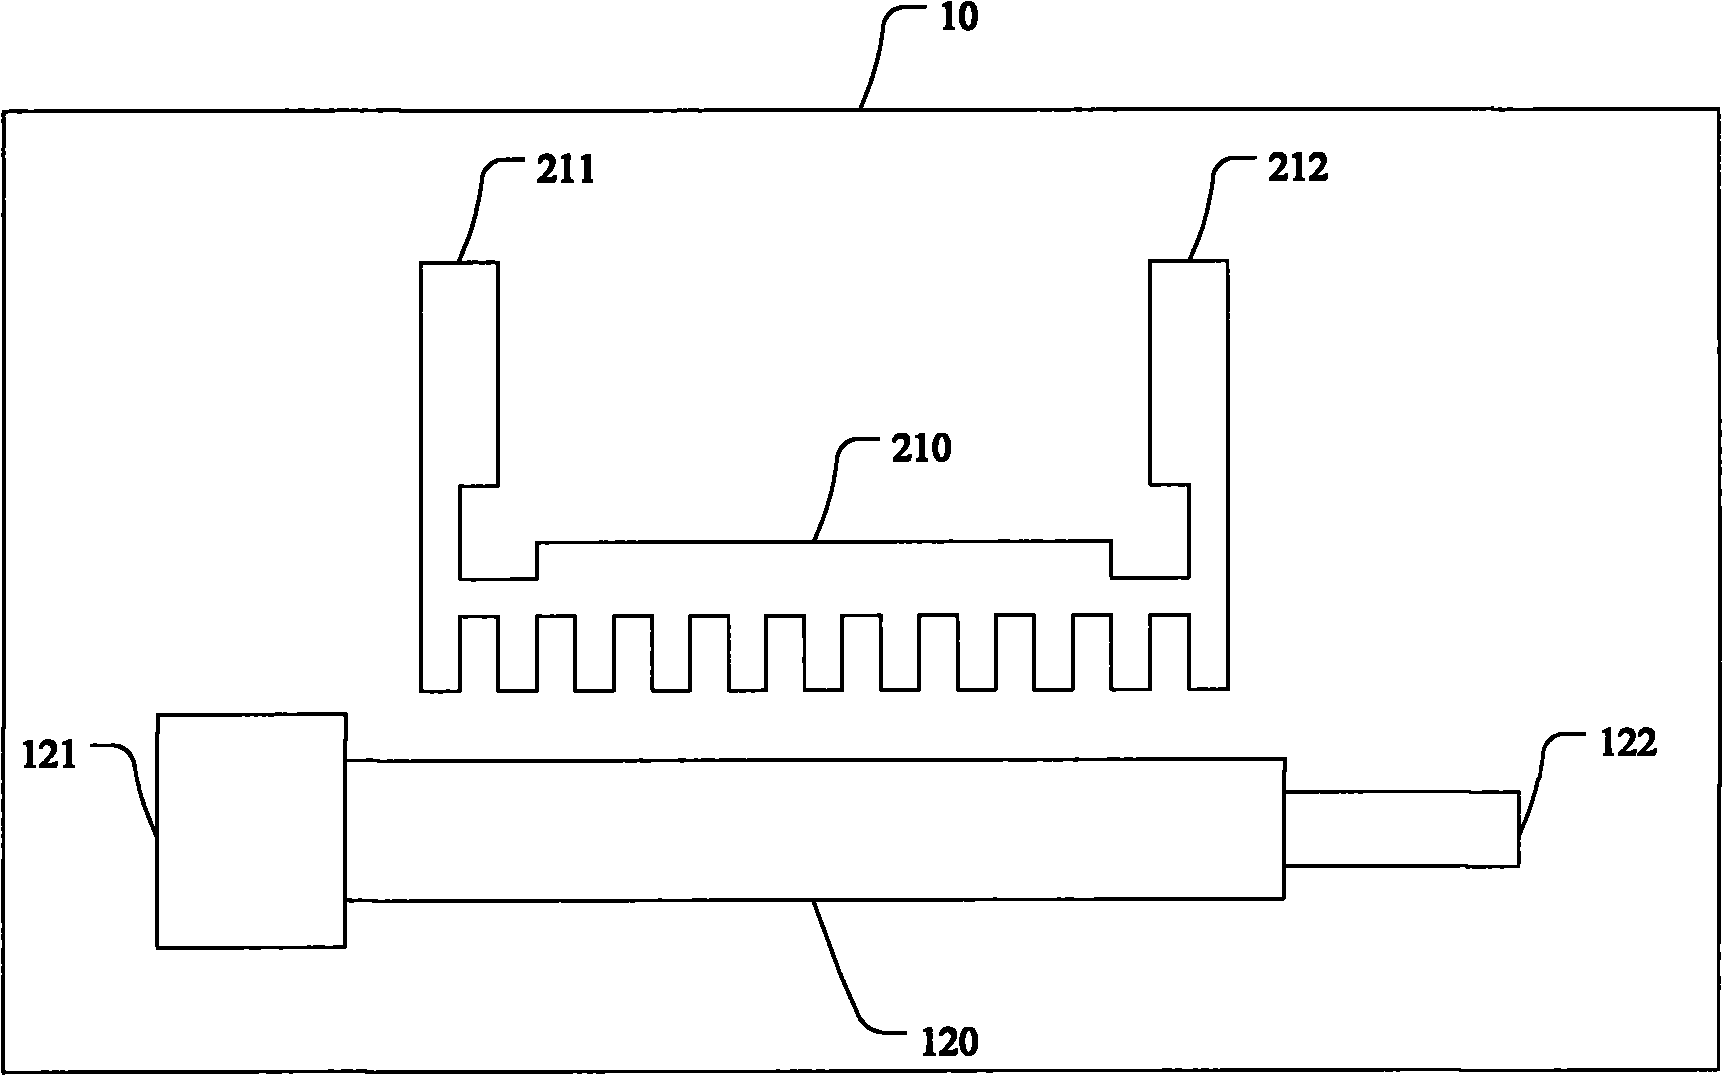 Coupler and power amplification system